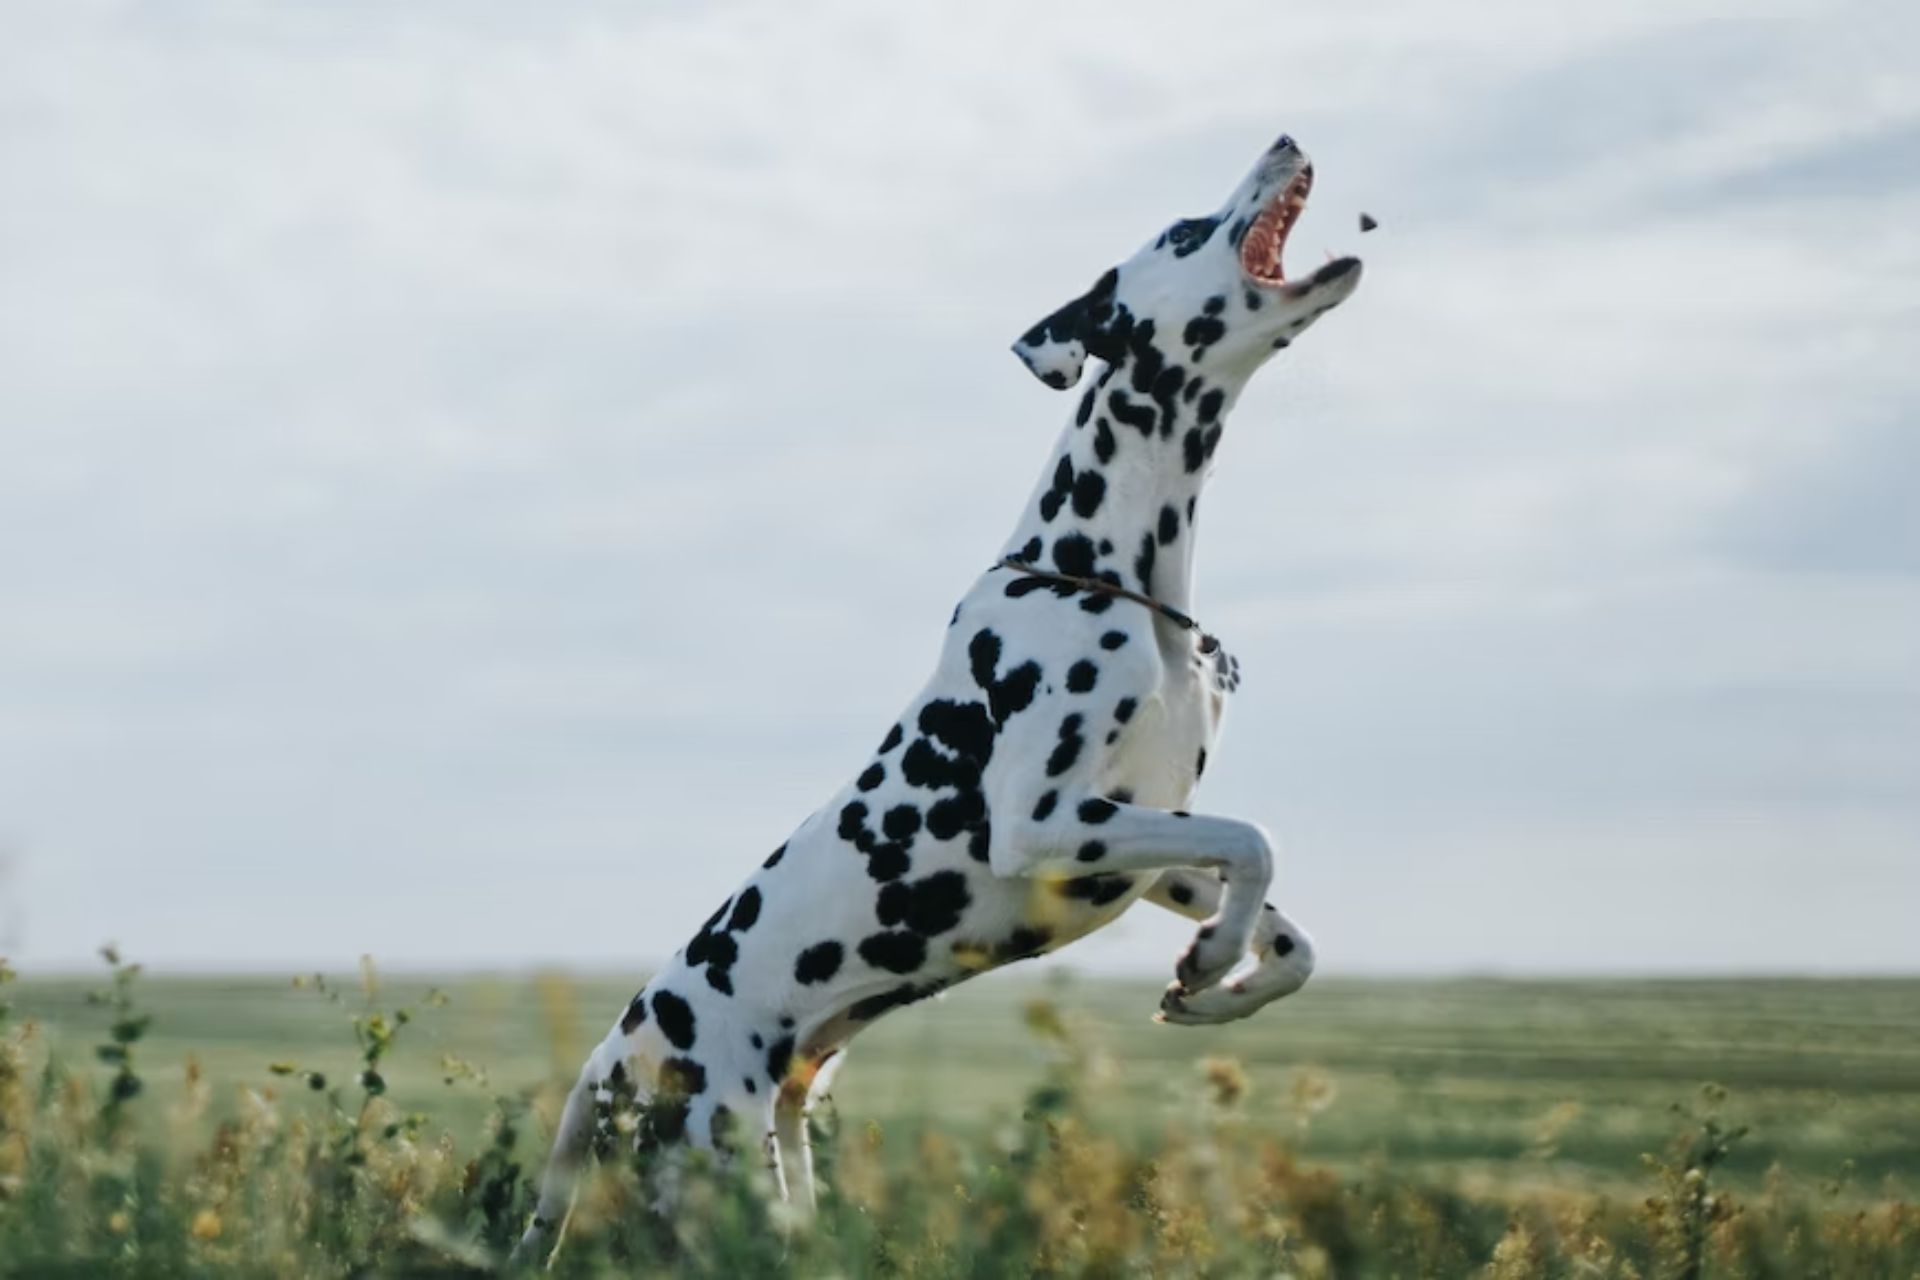 Dalmatian jumping for toy.